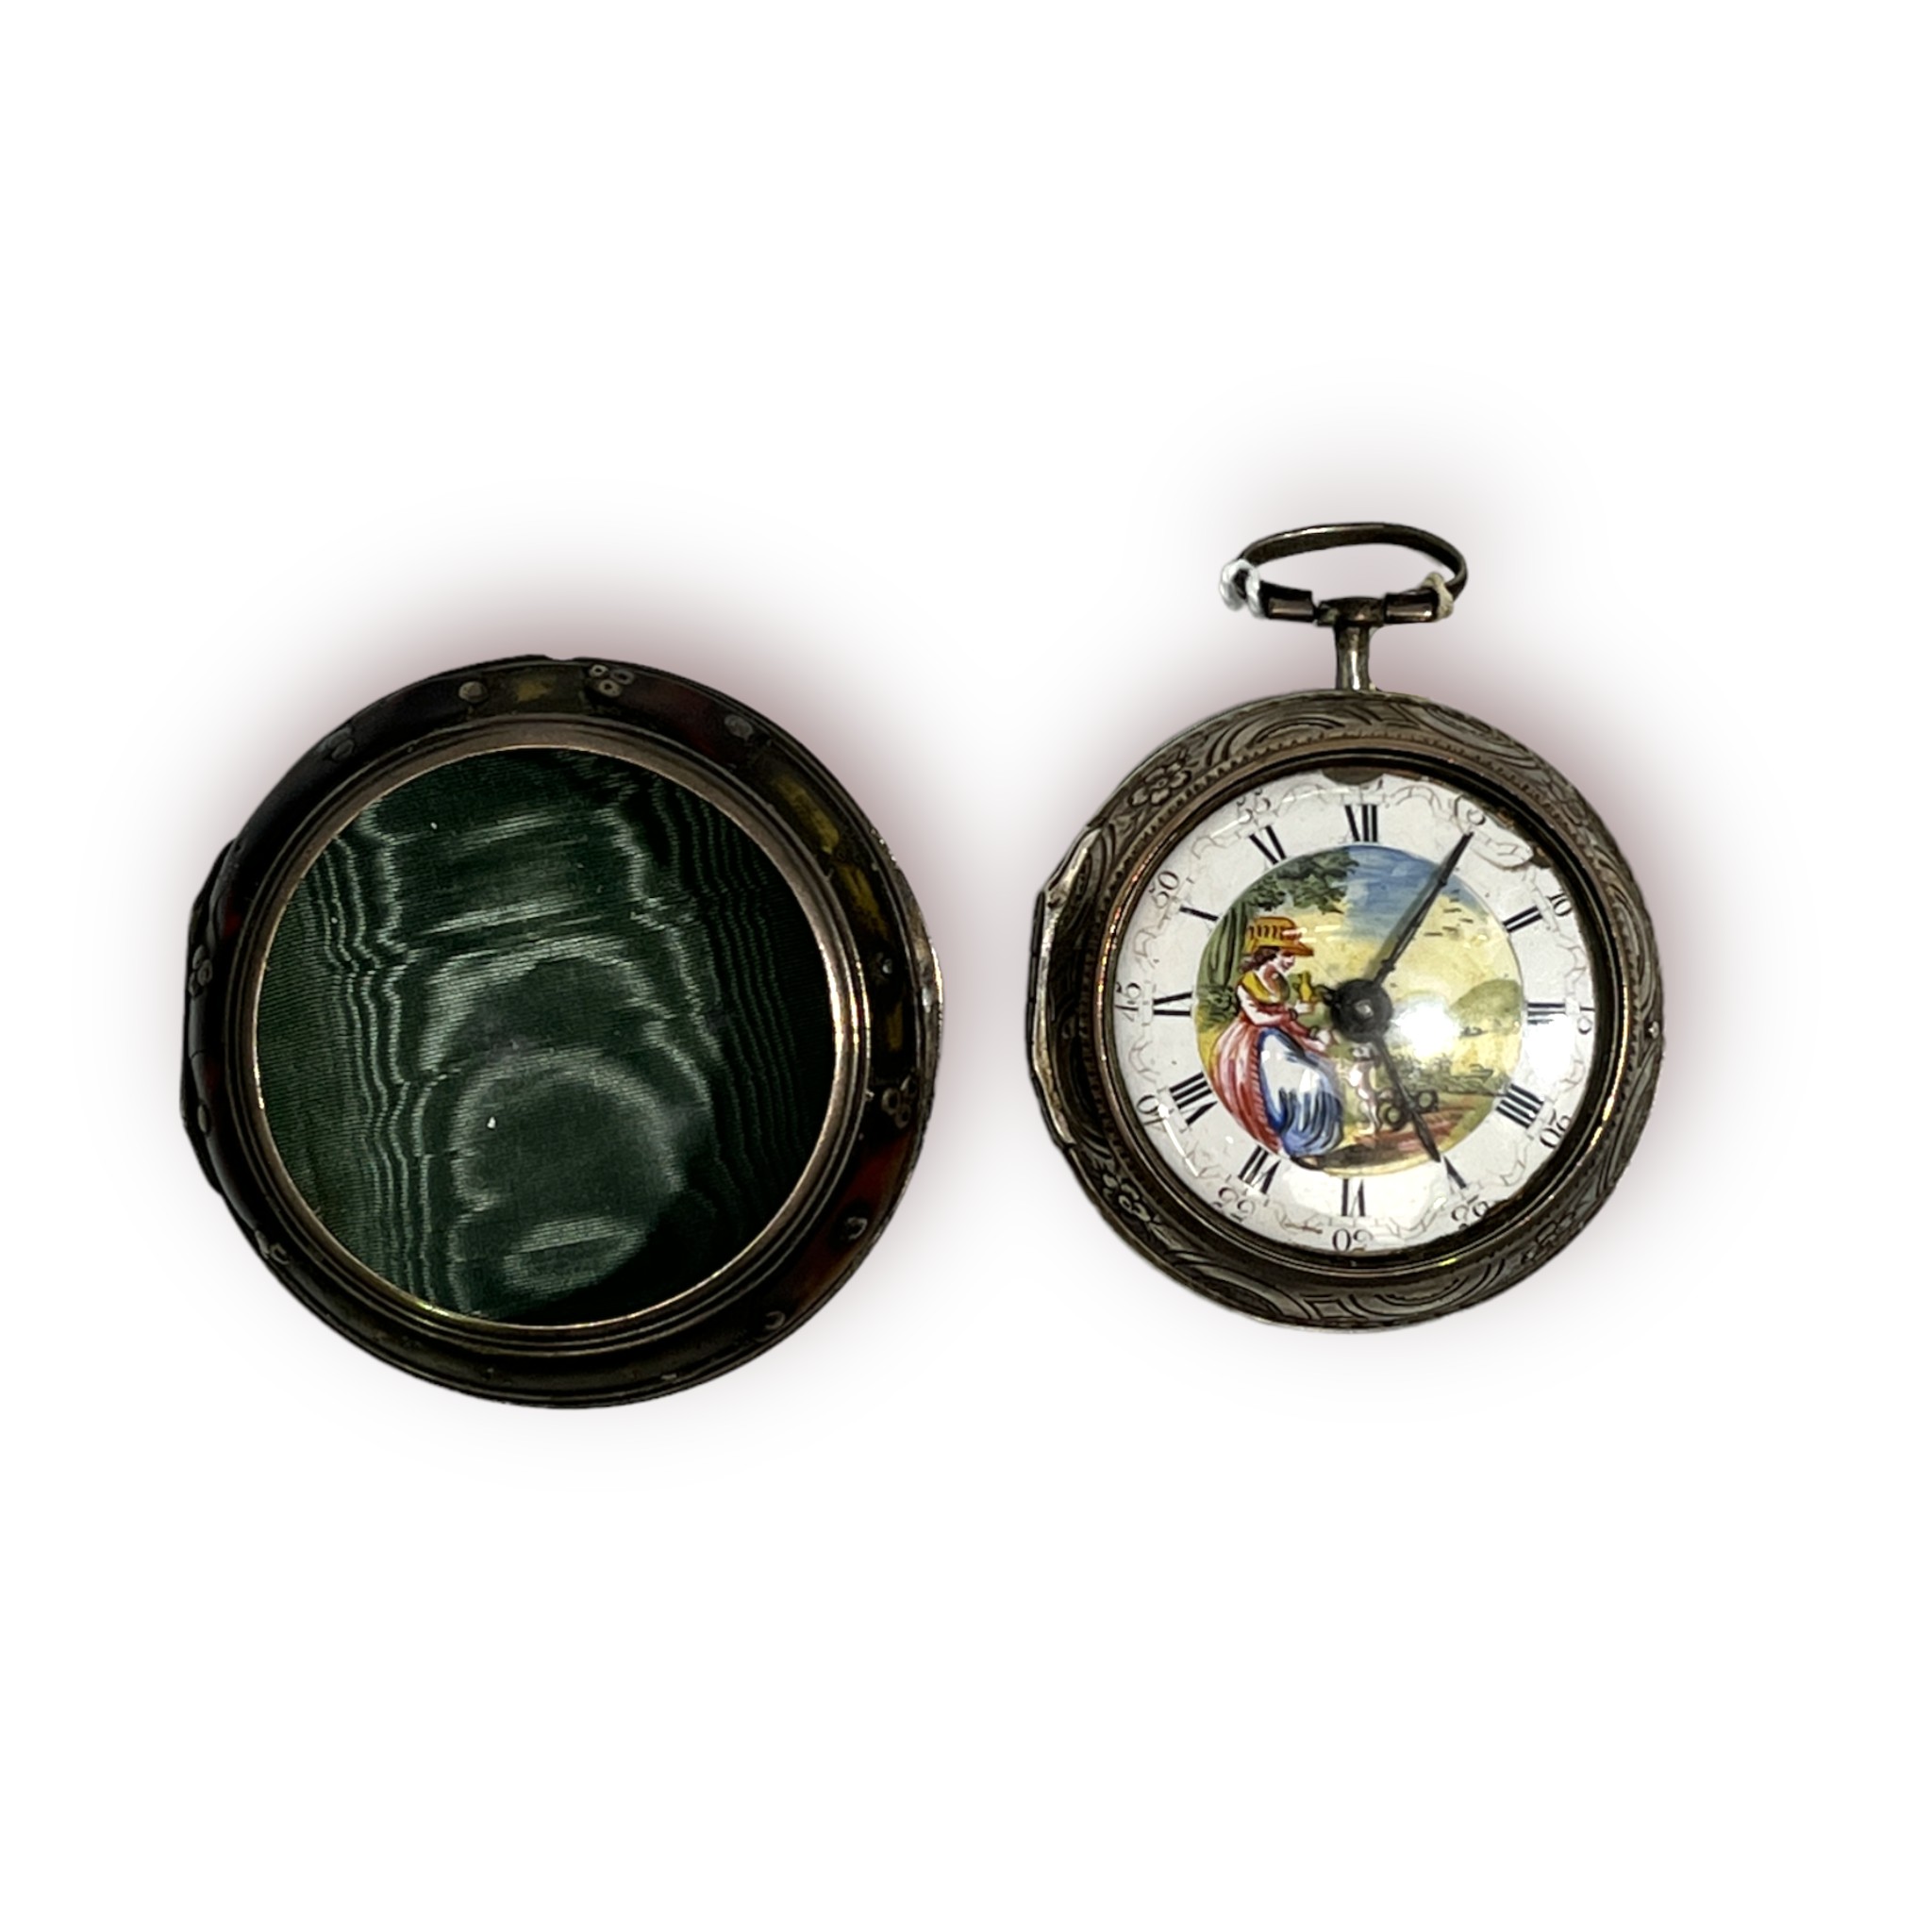 An 18th century, silver pair-case, verge pocket watch, the enamel dial with central portrait of a - Image 3 of 4